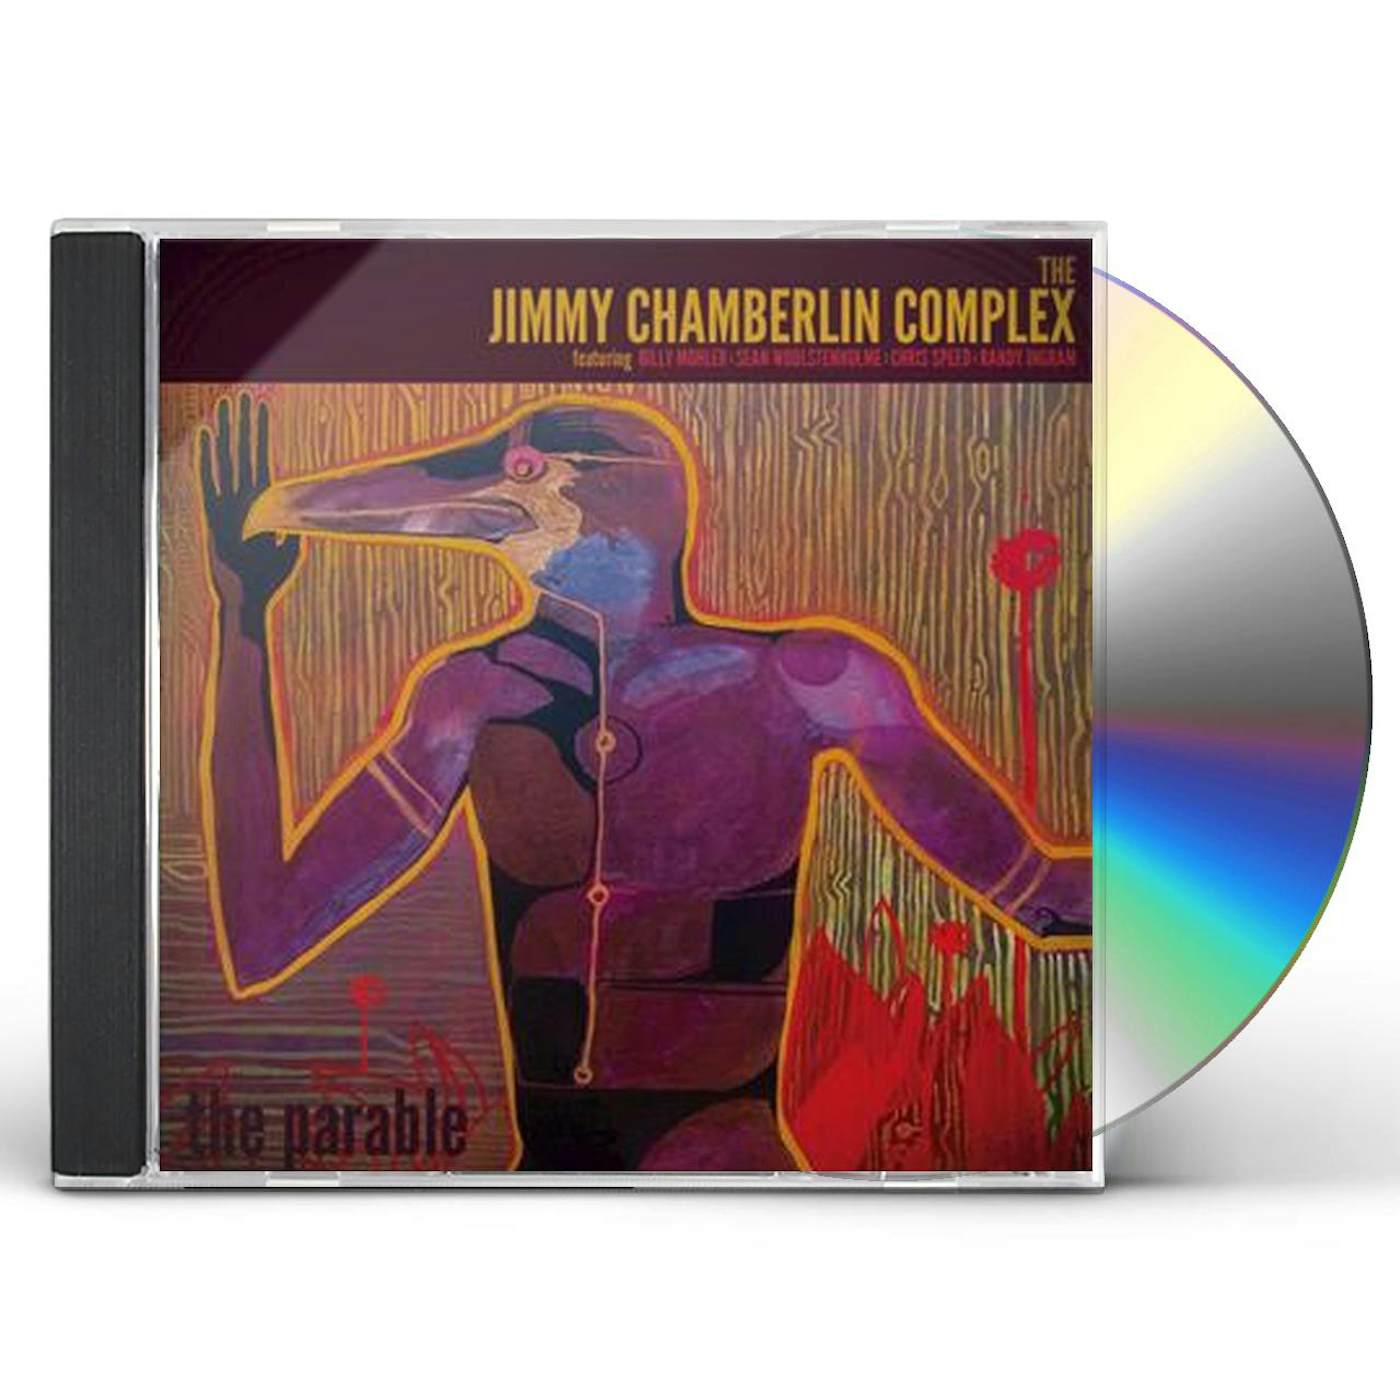 Jimmy Chamberlin Complex PARABLE CD